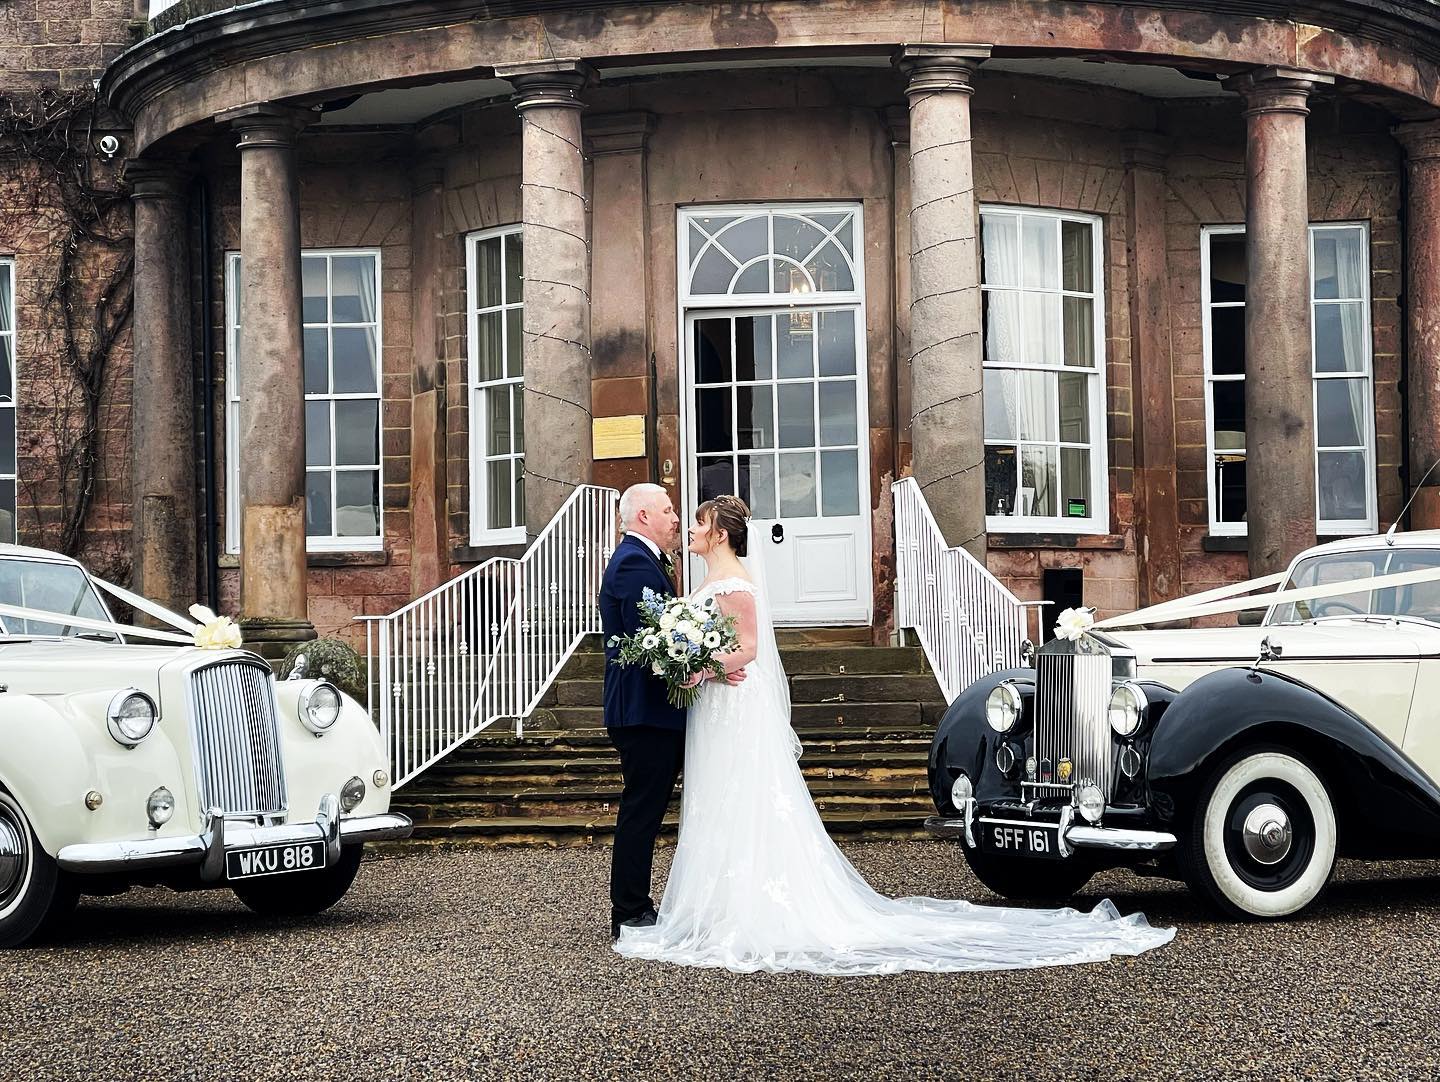 Bride and Groom facing each others in front of a venue near Sheffield with two classic wedding cars on either side of the couple. Bride is holding a large bouquet of flowers